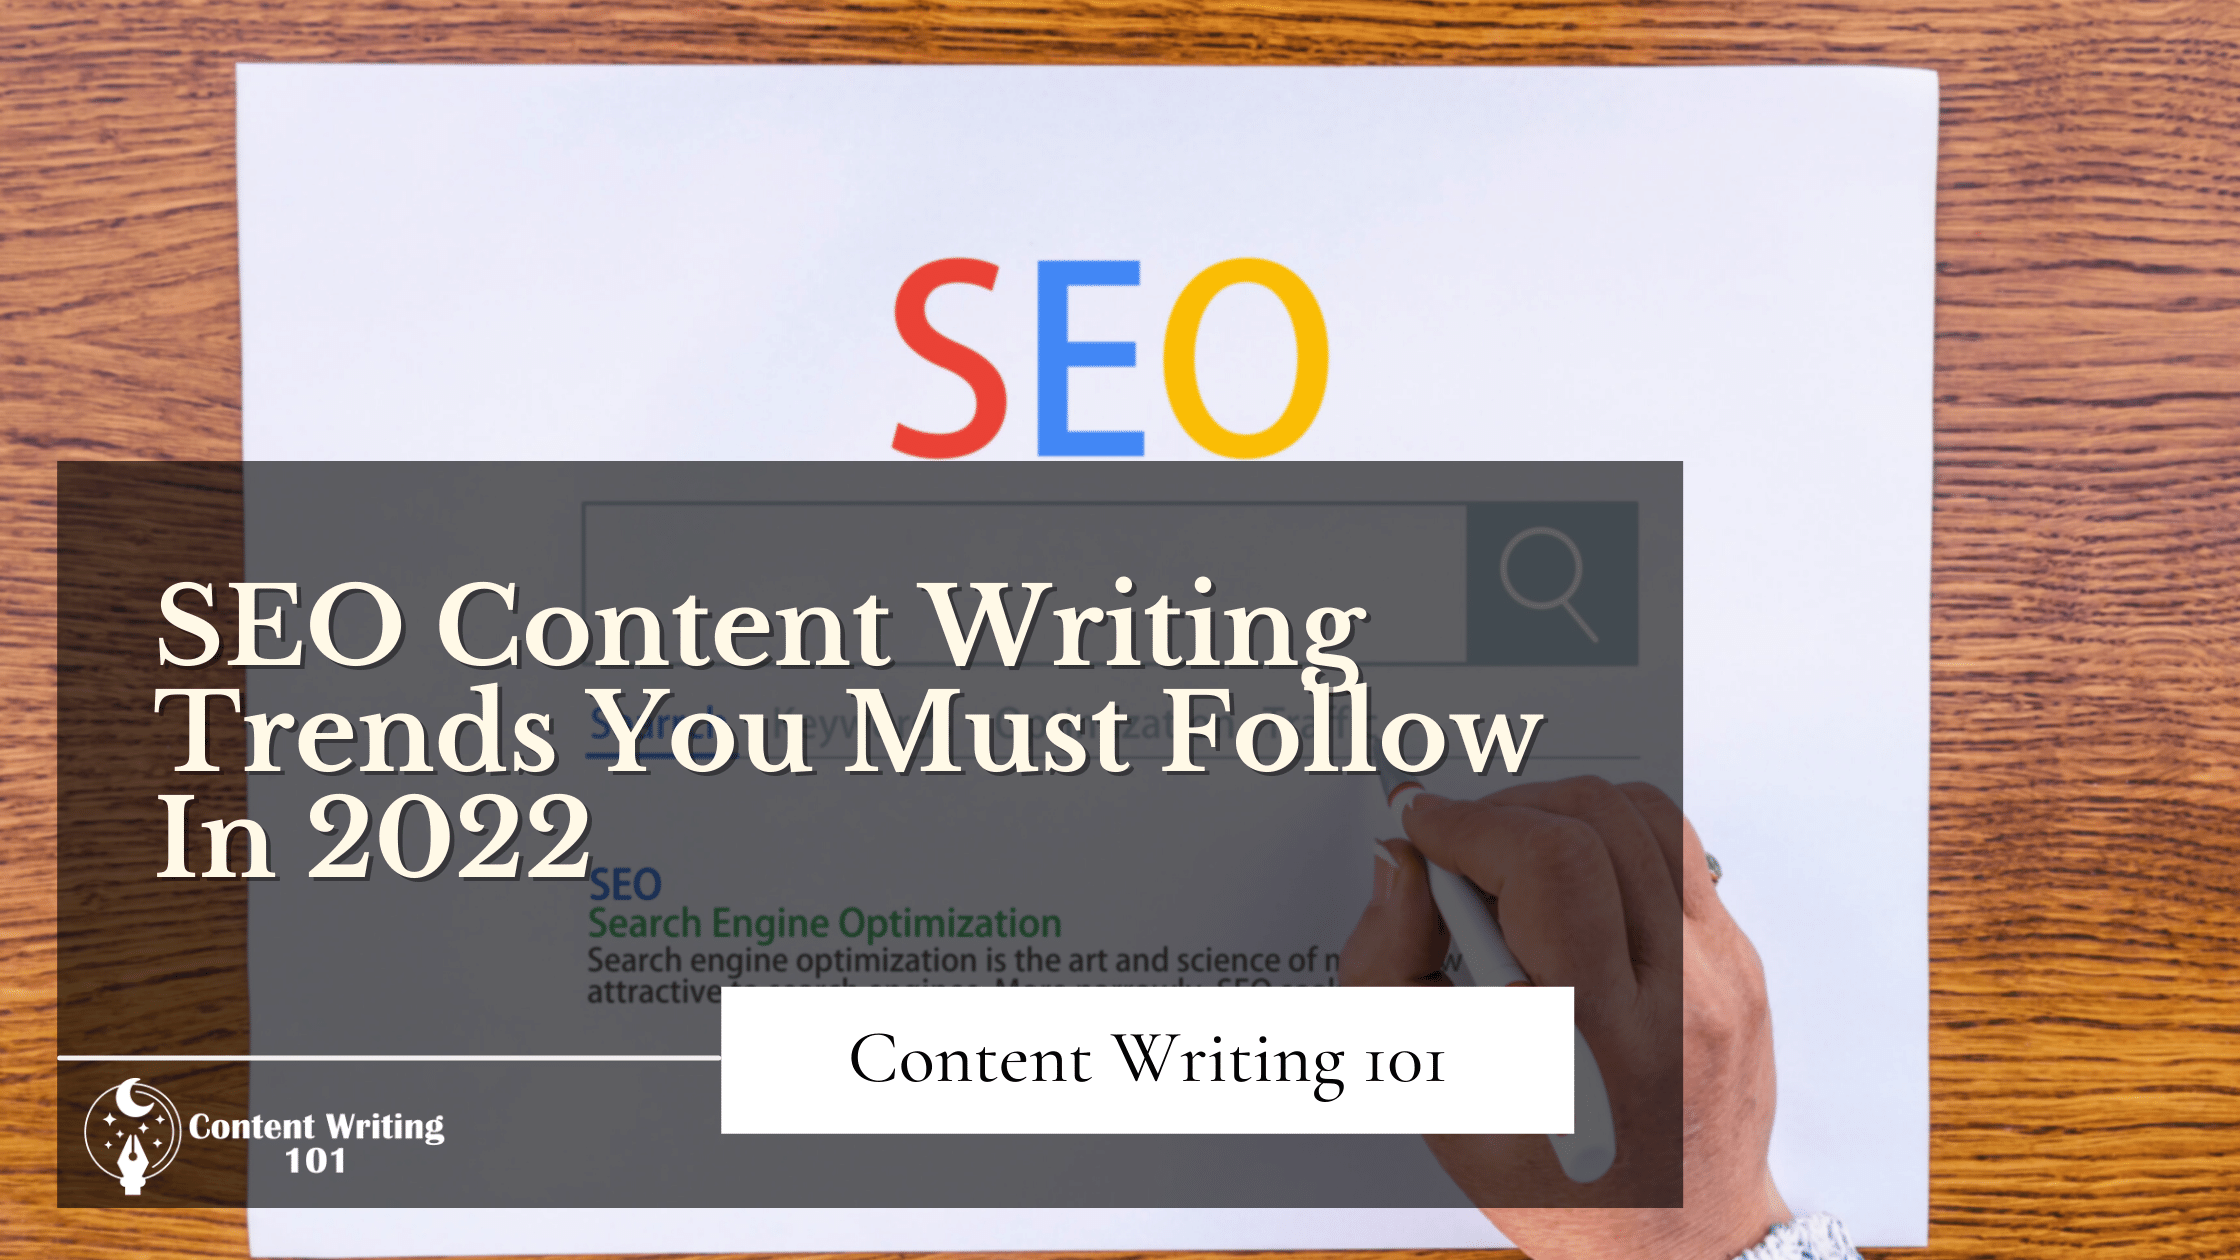 SEO Content Writing Trends You Must Follow In 2022